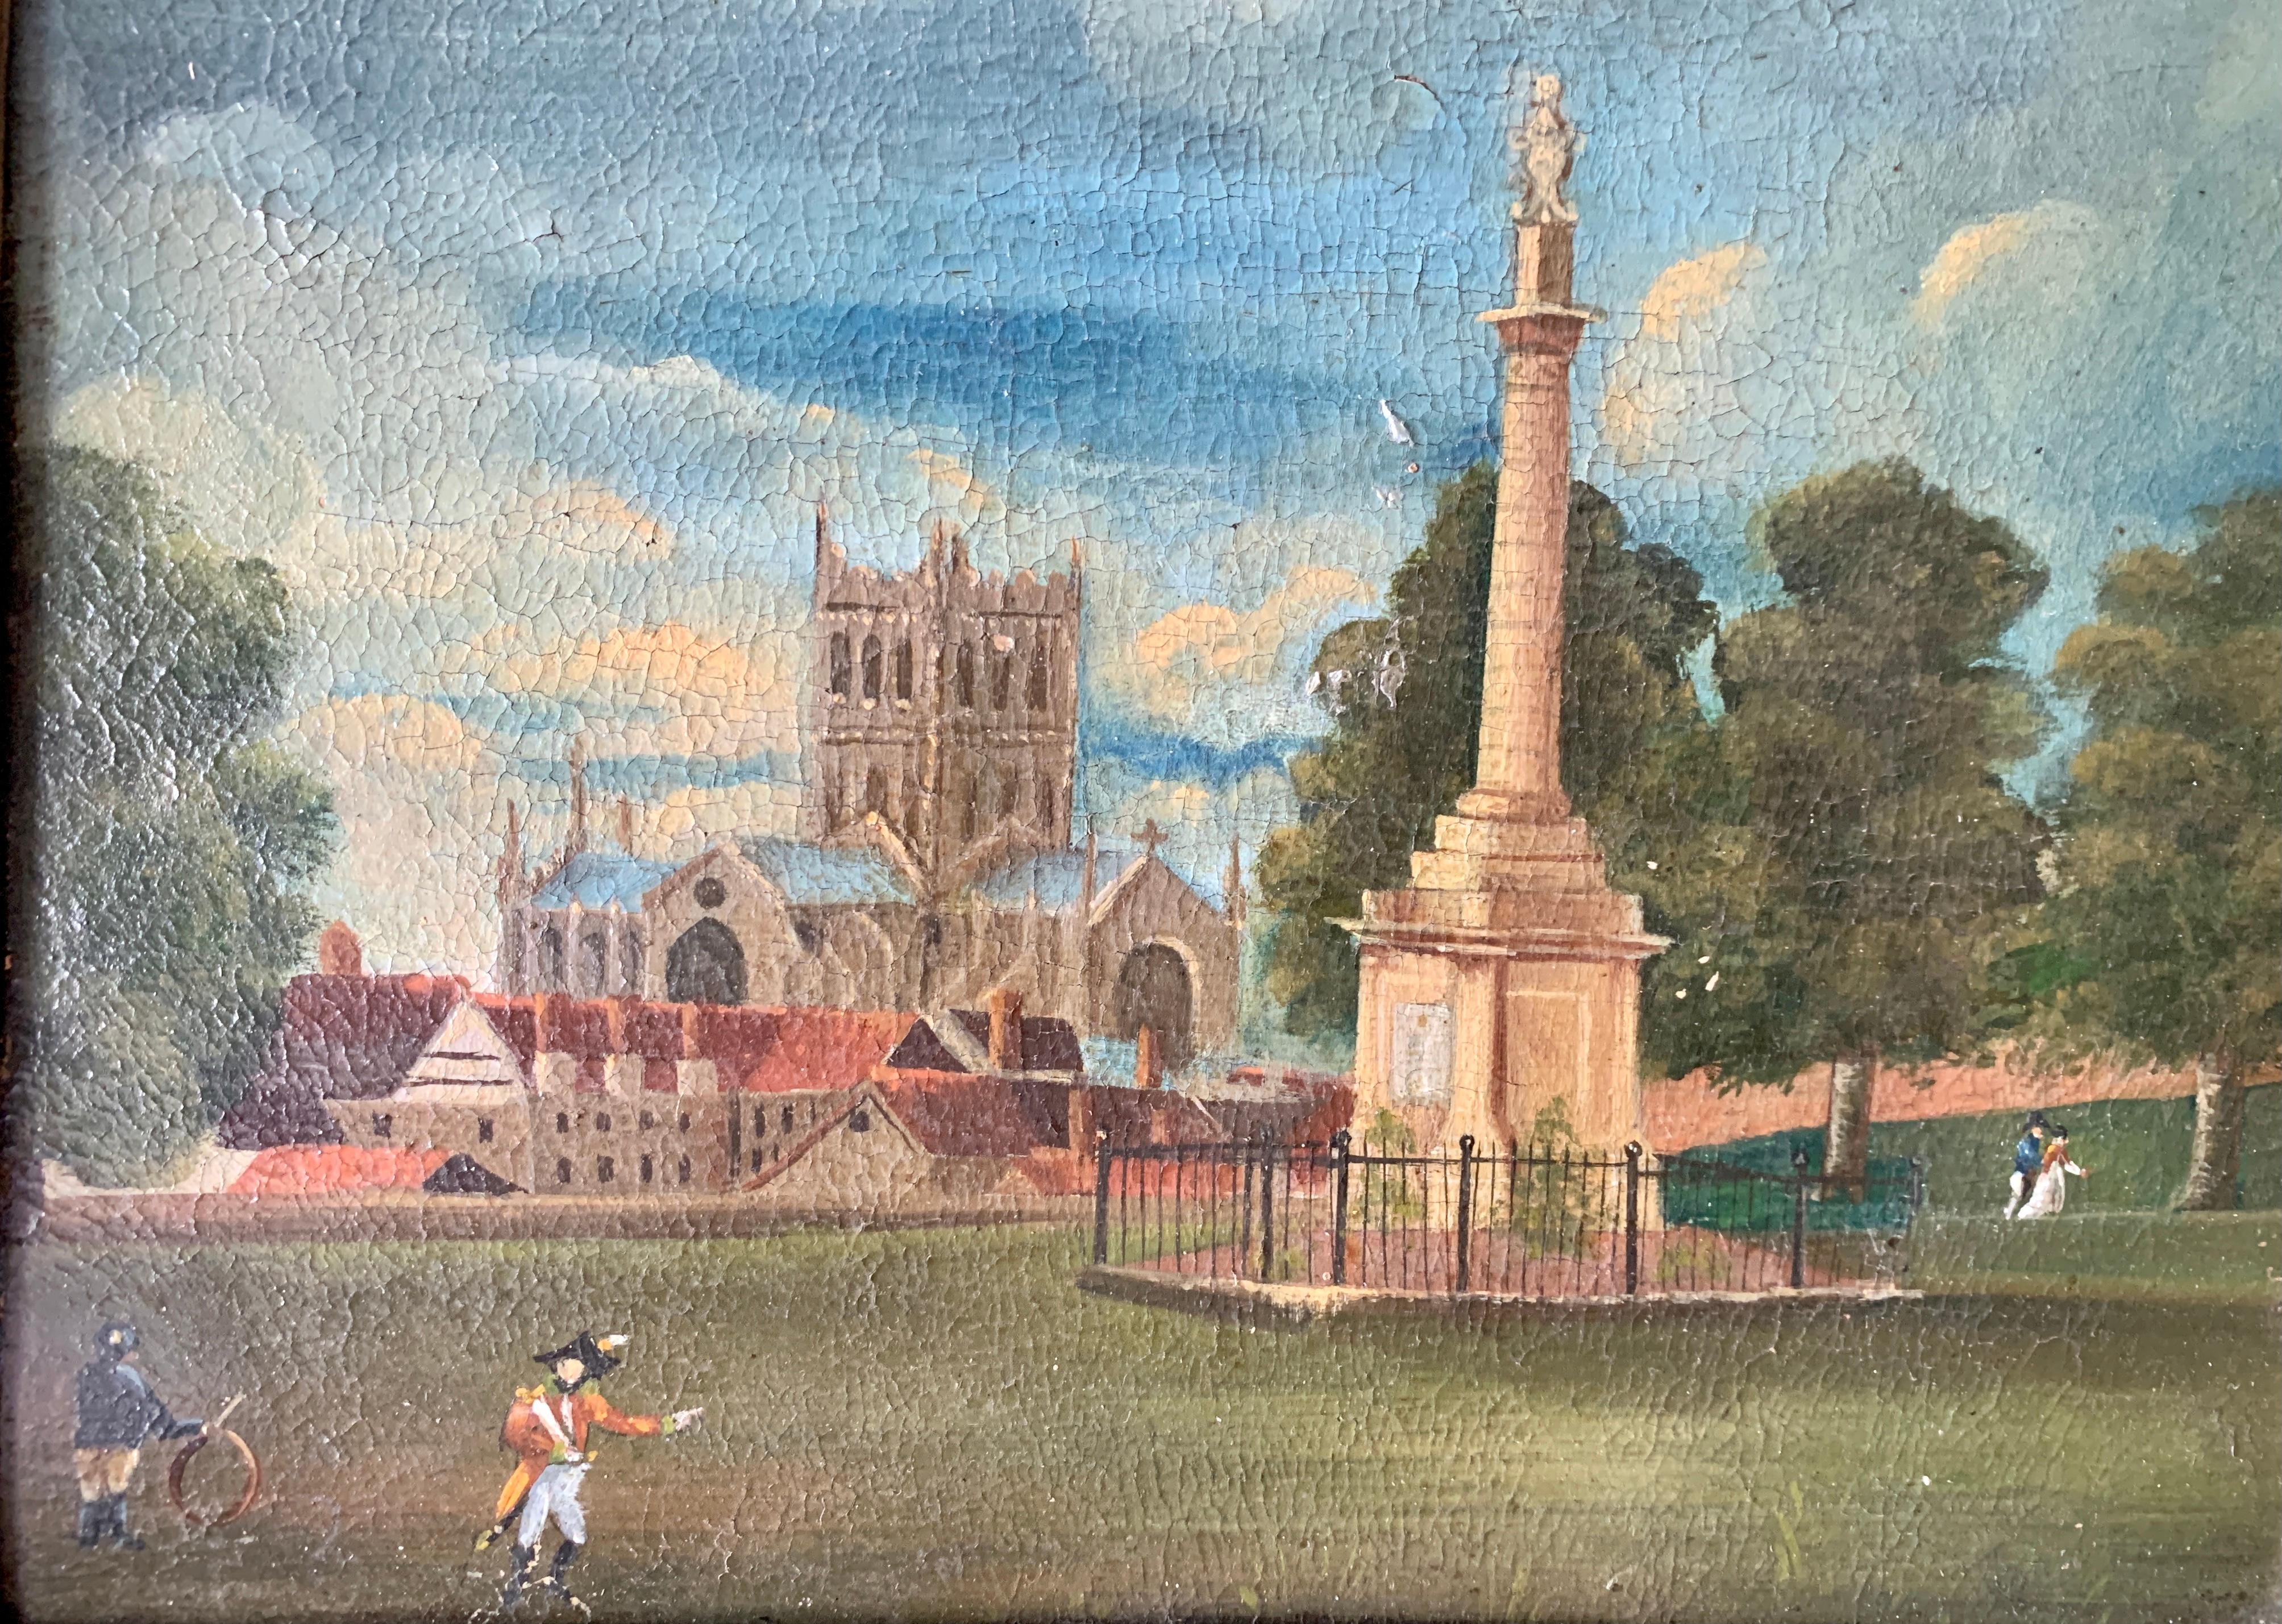 19th century English folk art, Town scene with soldier my a monument and church - Painting by Unknown